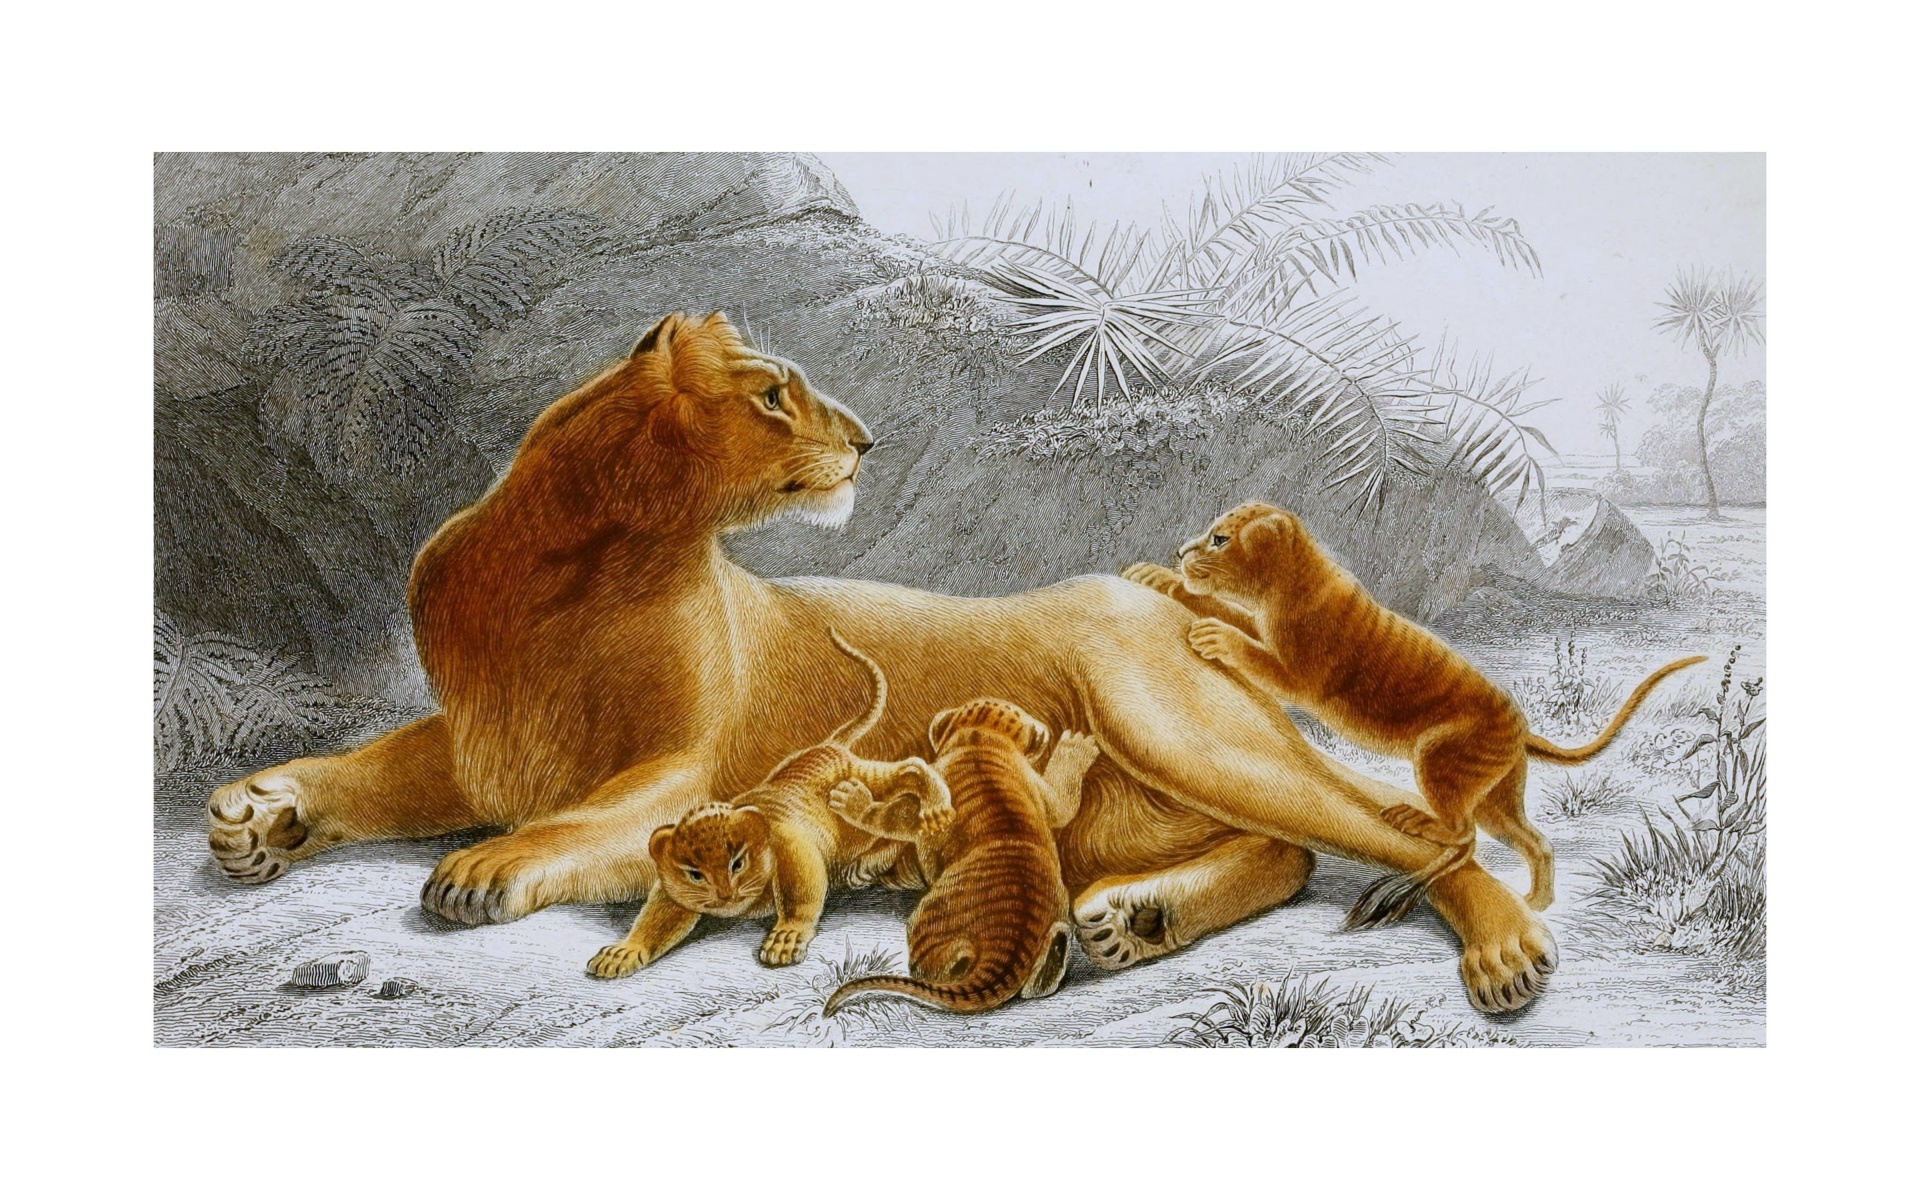 Big Cat Lion Wildcats Wild Animal Hunter Spotted Vintage Old 1900's Painted Paint Art Retro Poster Illustration